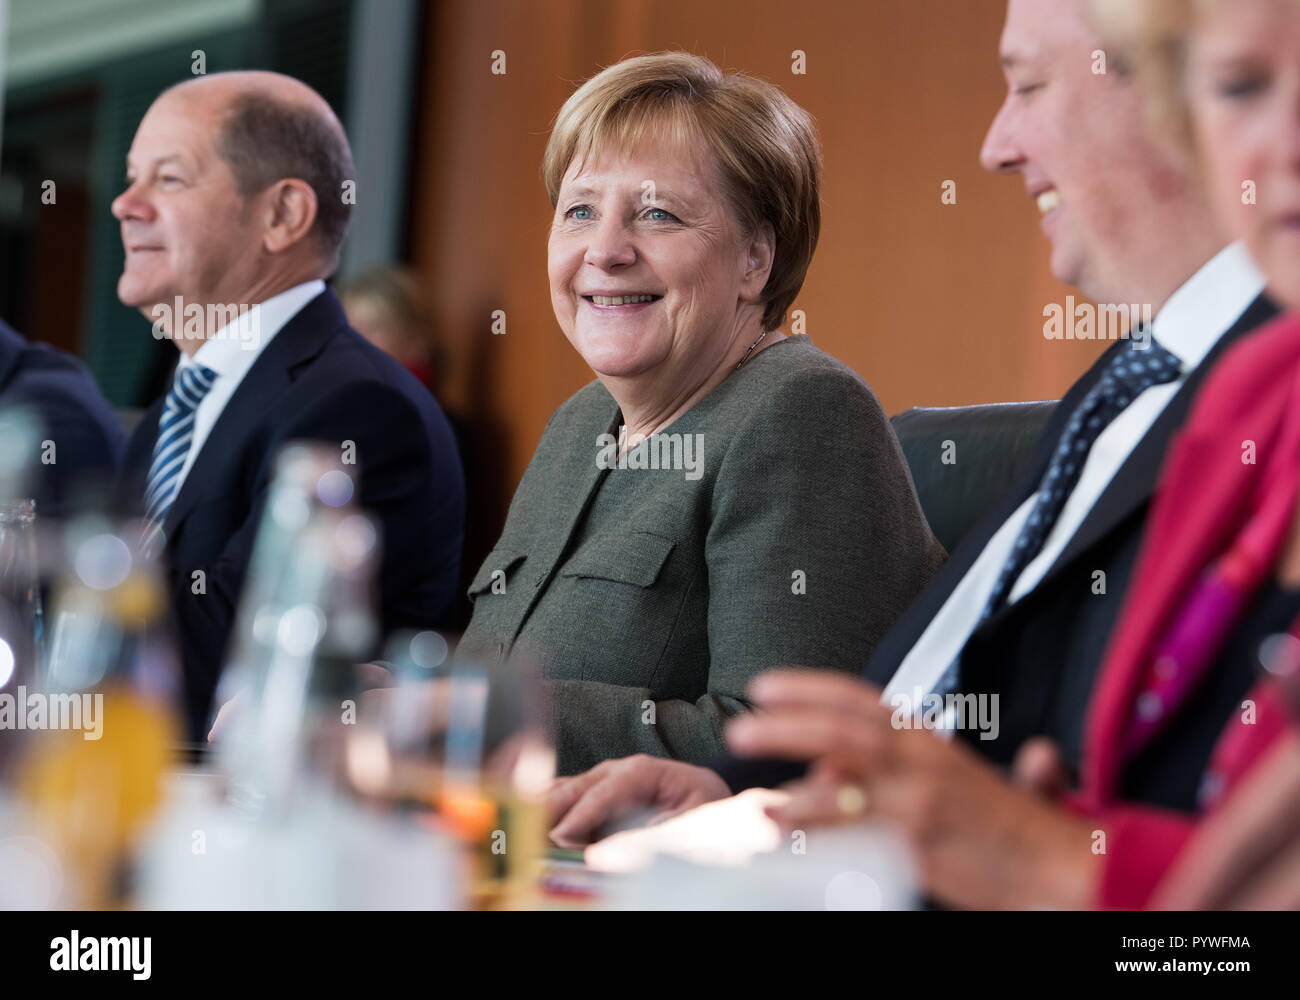 Berlin, Germany. 31st Oct, 2018. Federal Chancellor Angela Merkel (CDU) sits in the Federal Chancellery at the beginning of the Federal Cabinet meeting between Olaf Scholz (l, SPD), Federal Minister of Finance, Helge Braun (2nd from right, CDU), Head of the Federal Chancellery, and Monika Grütters (r, CDU), Minister of State for Culture and Media. The members of the Federal Government are today discussing issues such as organ donations, minimum wages and tax issues. Credit: Bernd von Jutrczenka/dpa/Alamy Live News Stock Photo